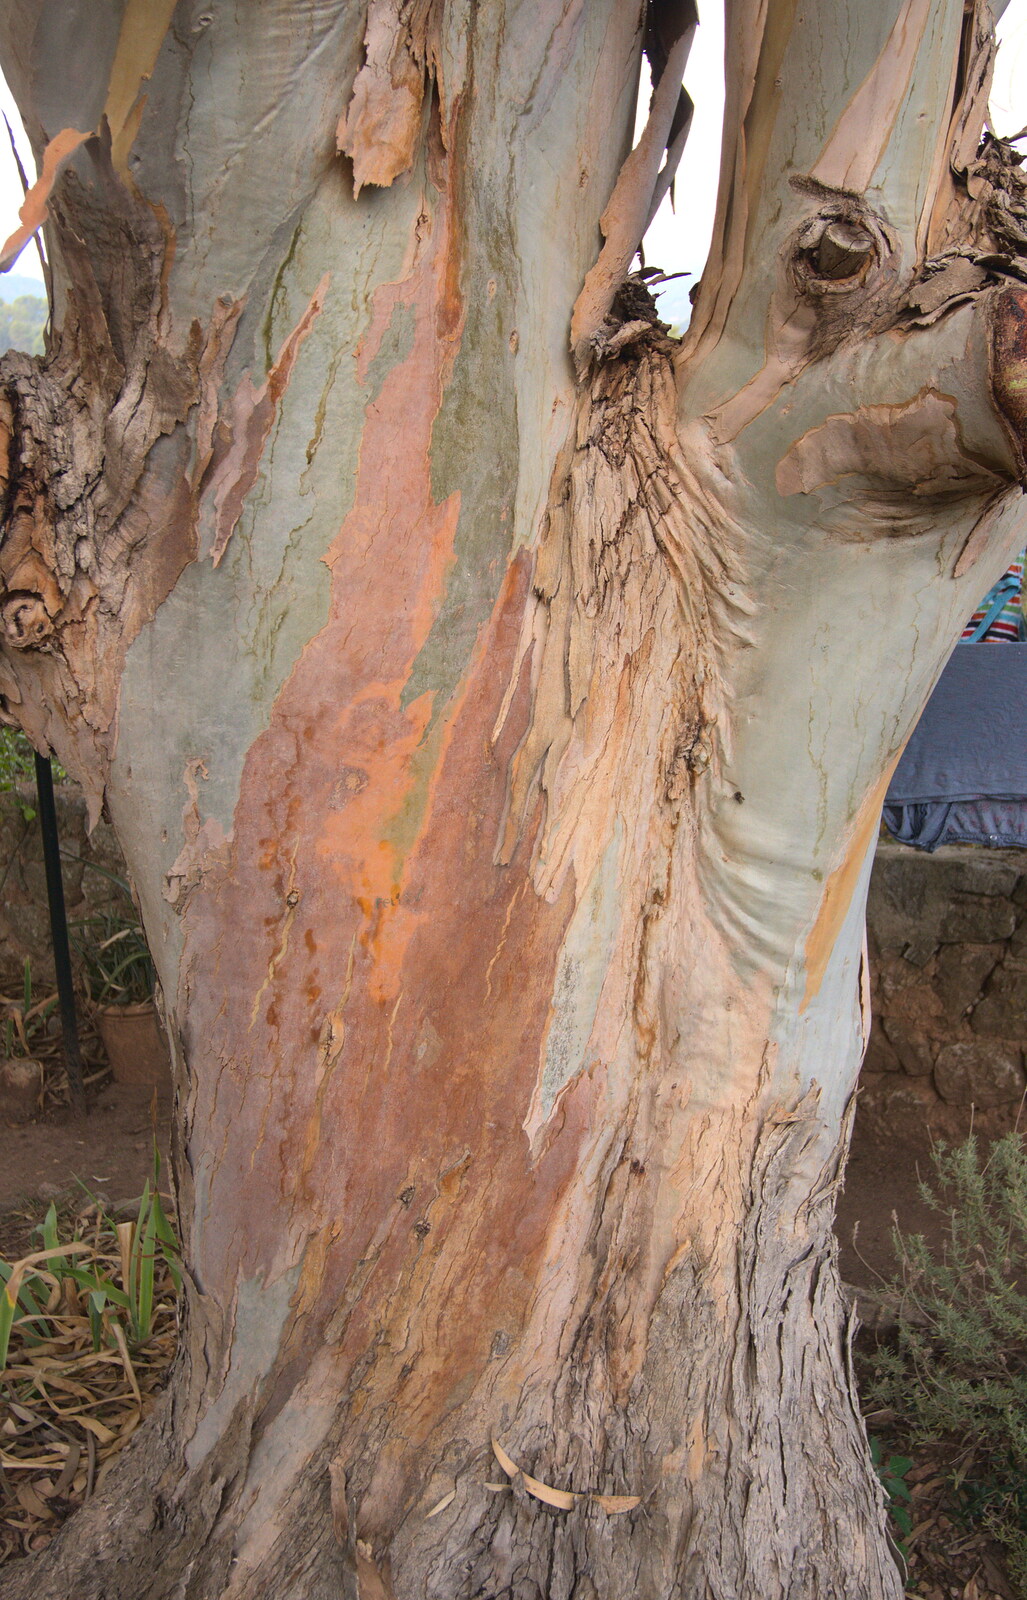 Multi-coloured eucalyptus tree from A Trip to Sóller, Mallorca, Spain - 8th-14th September 2012